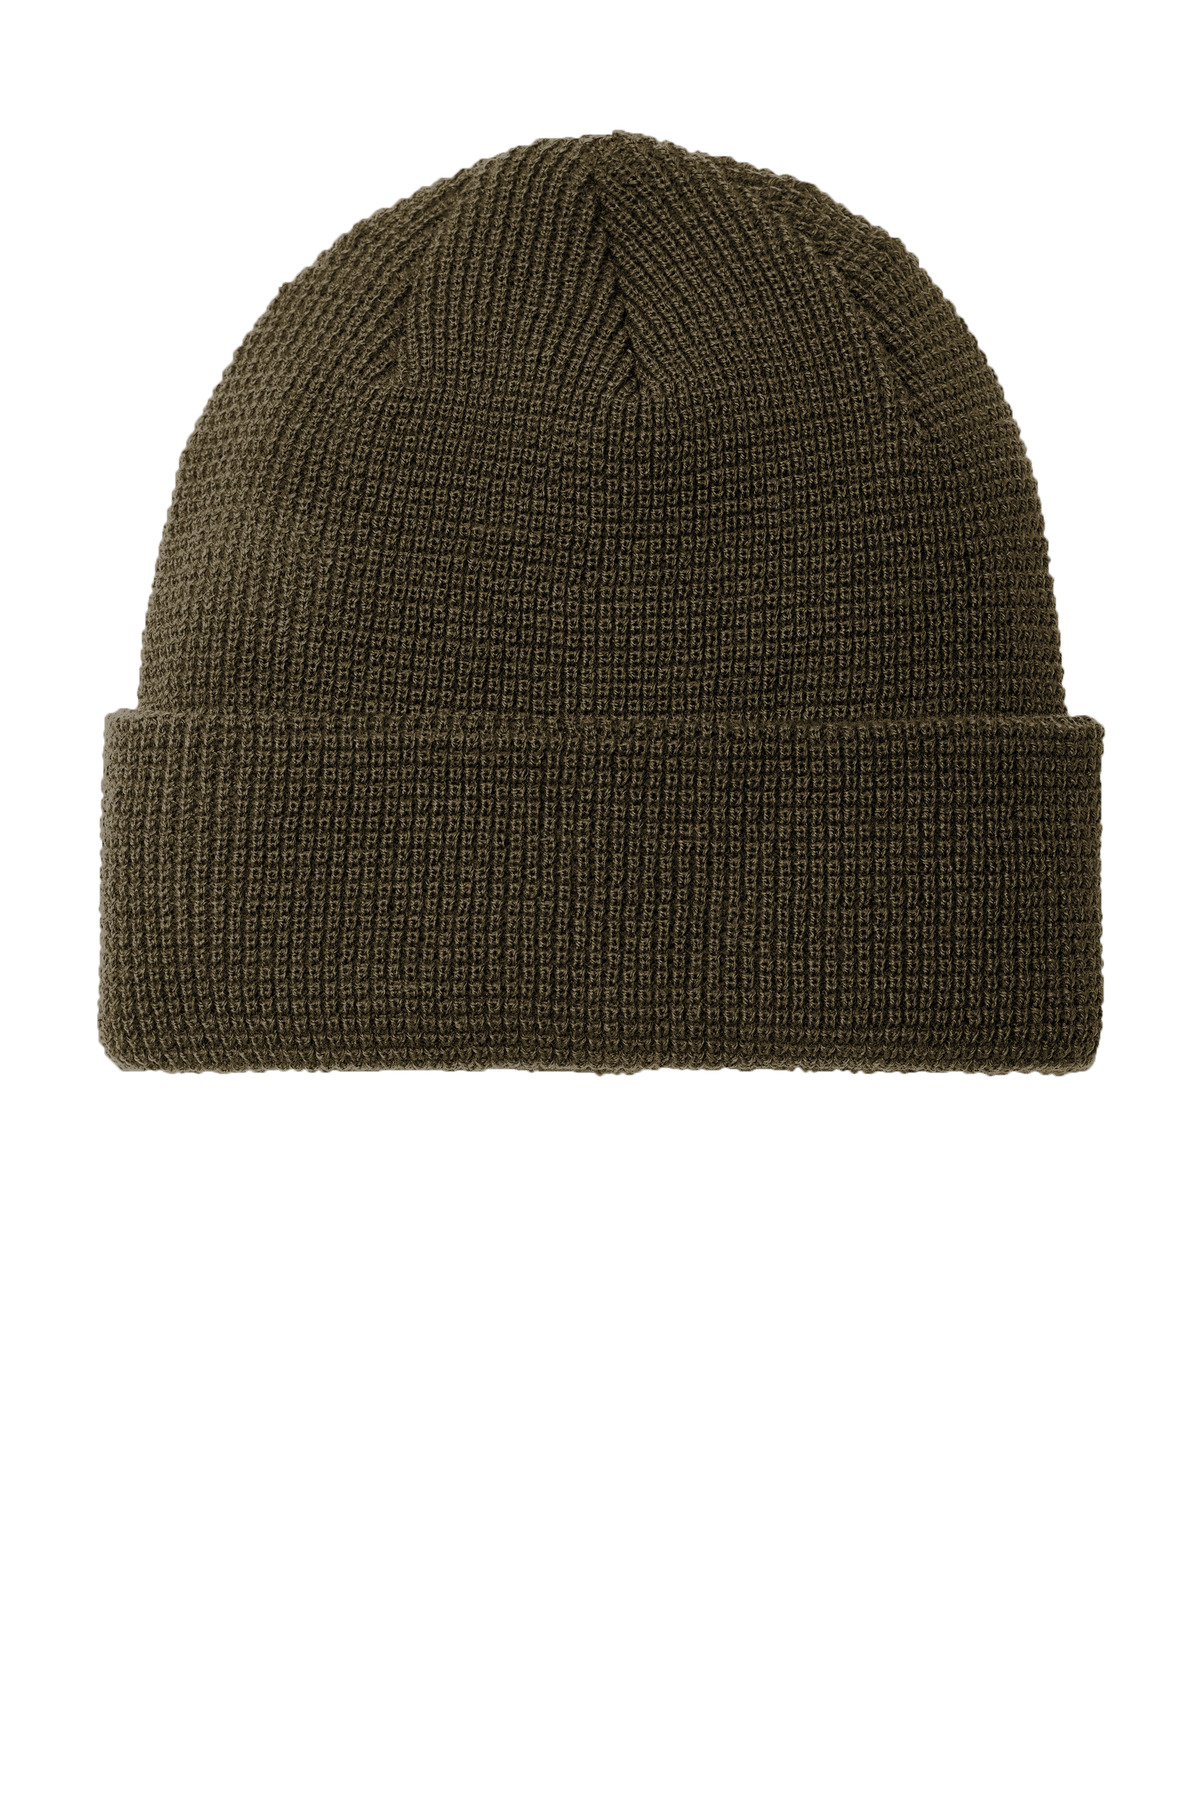 Port Authority Thermal Knit Cuffed Beanie-Port Authority